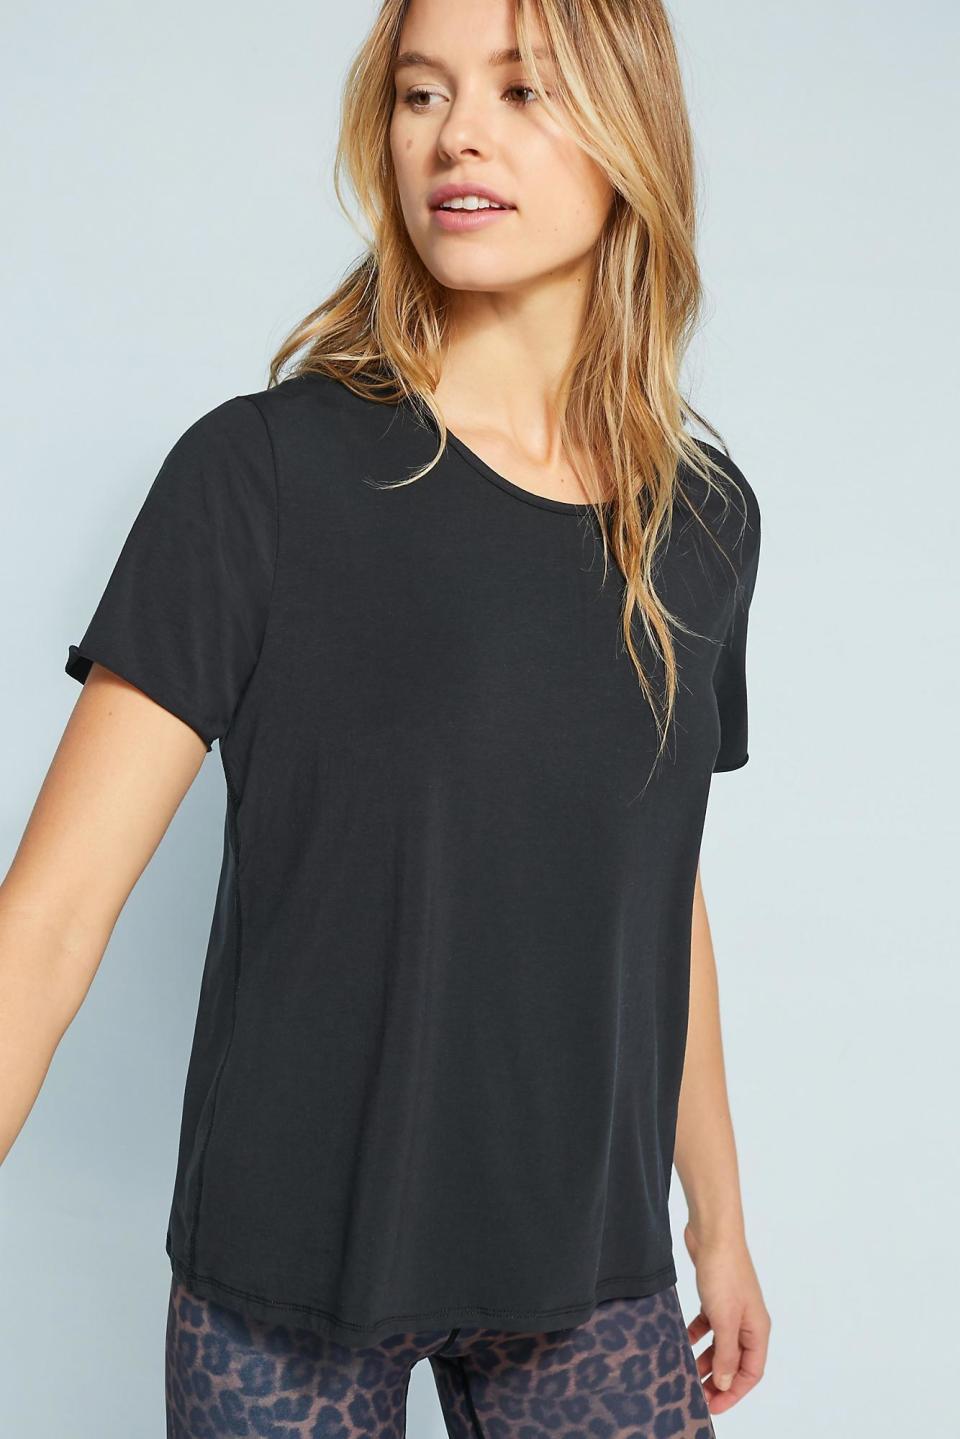 Science of Apparel Avery Basic Tee, $78